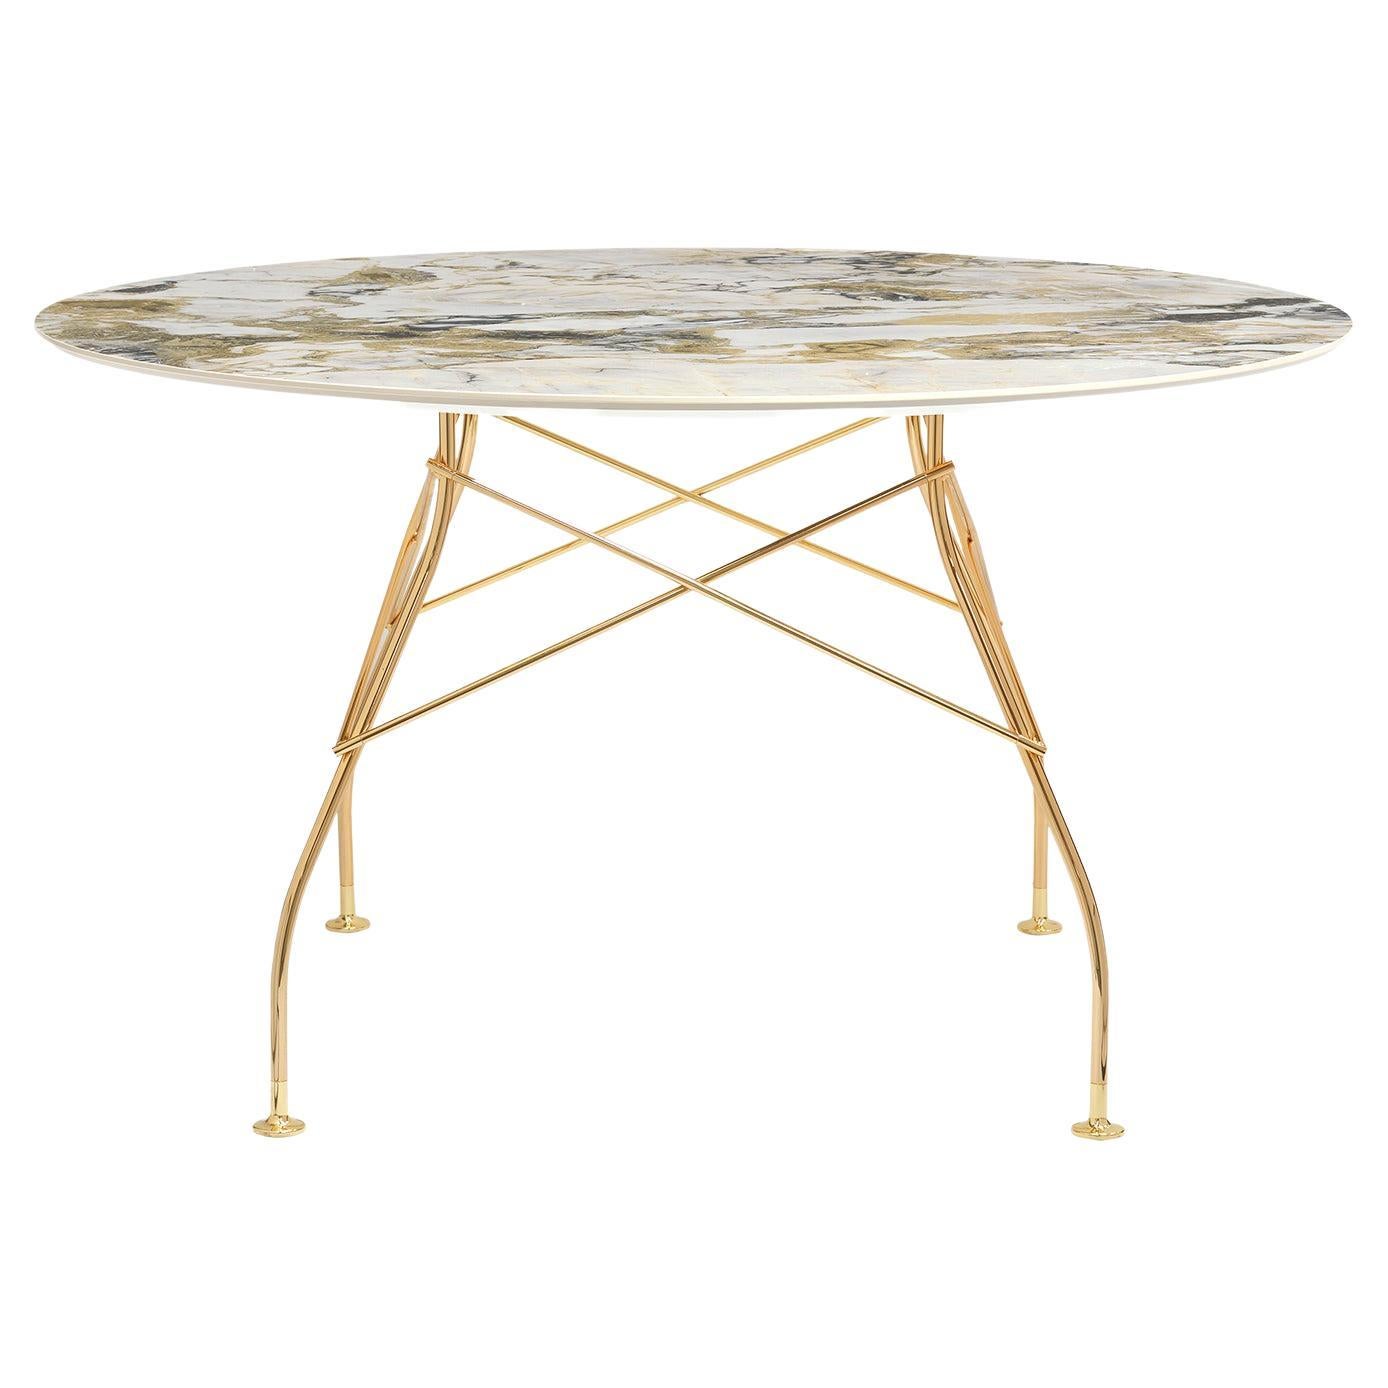 Kartell Round Glossy Table in Symphonie Marble by Antonio Citterio